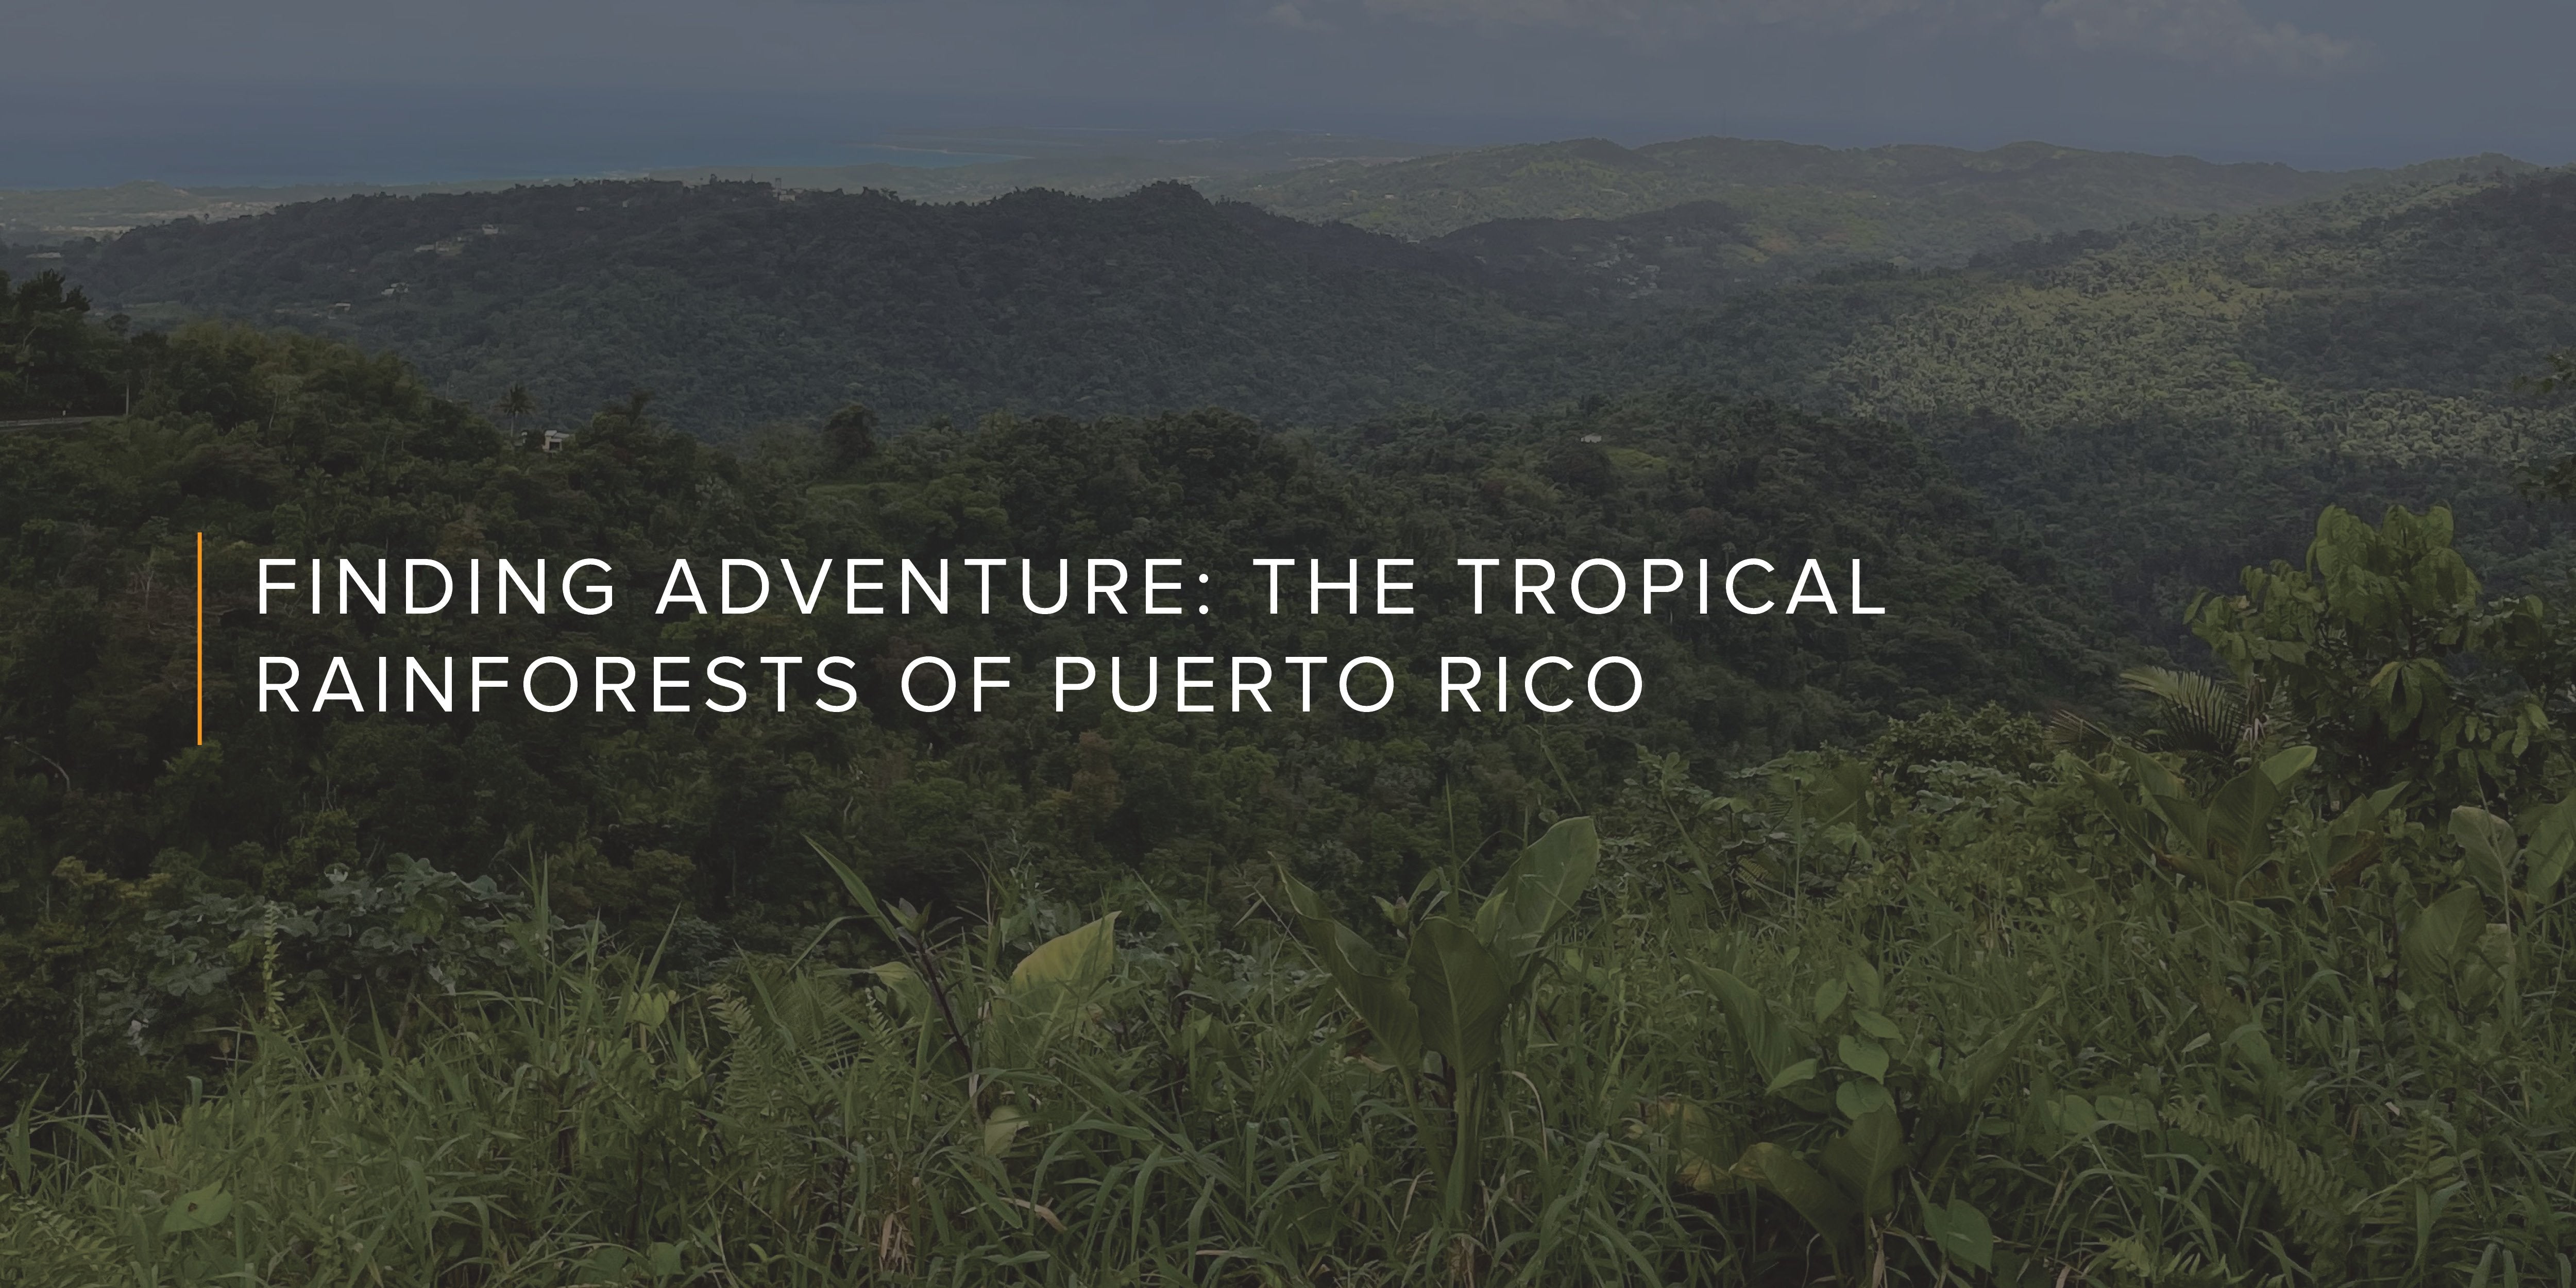 Finding Adventure: The Tropical Rainforests of Puerto Rico